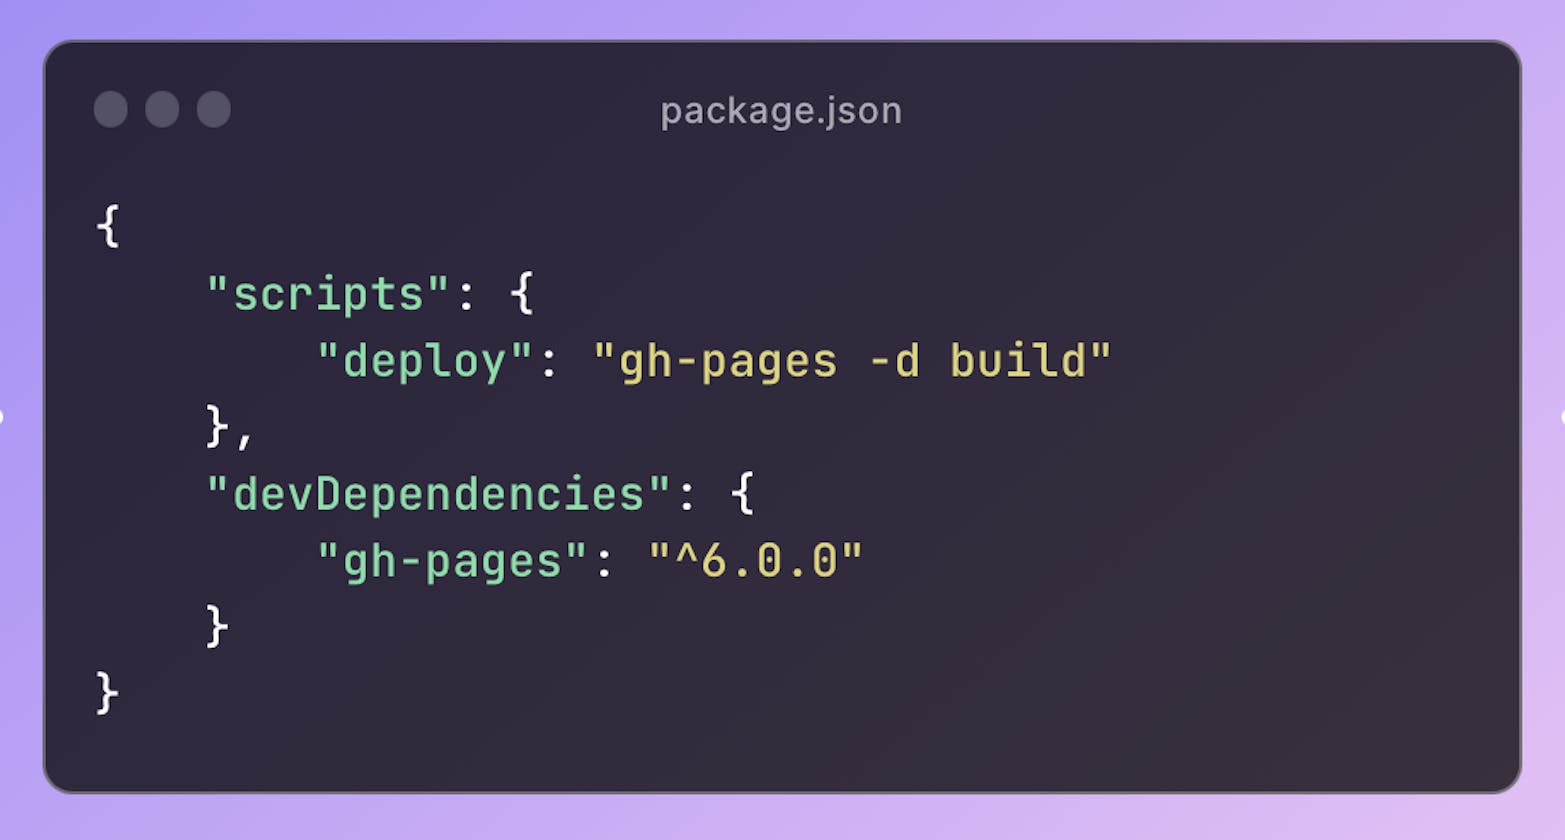 Deploying to GitHub Pages using gh-pages